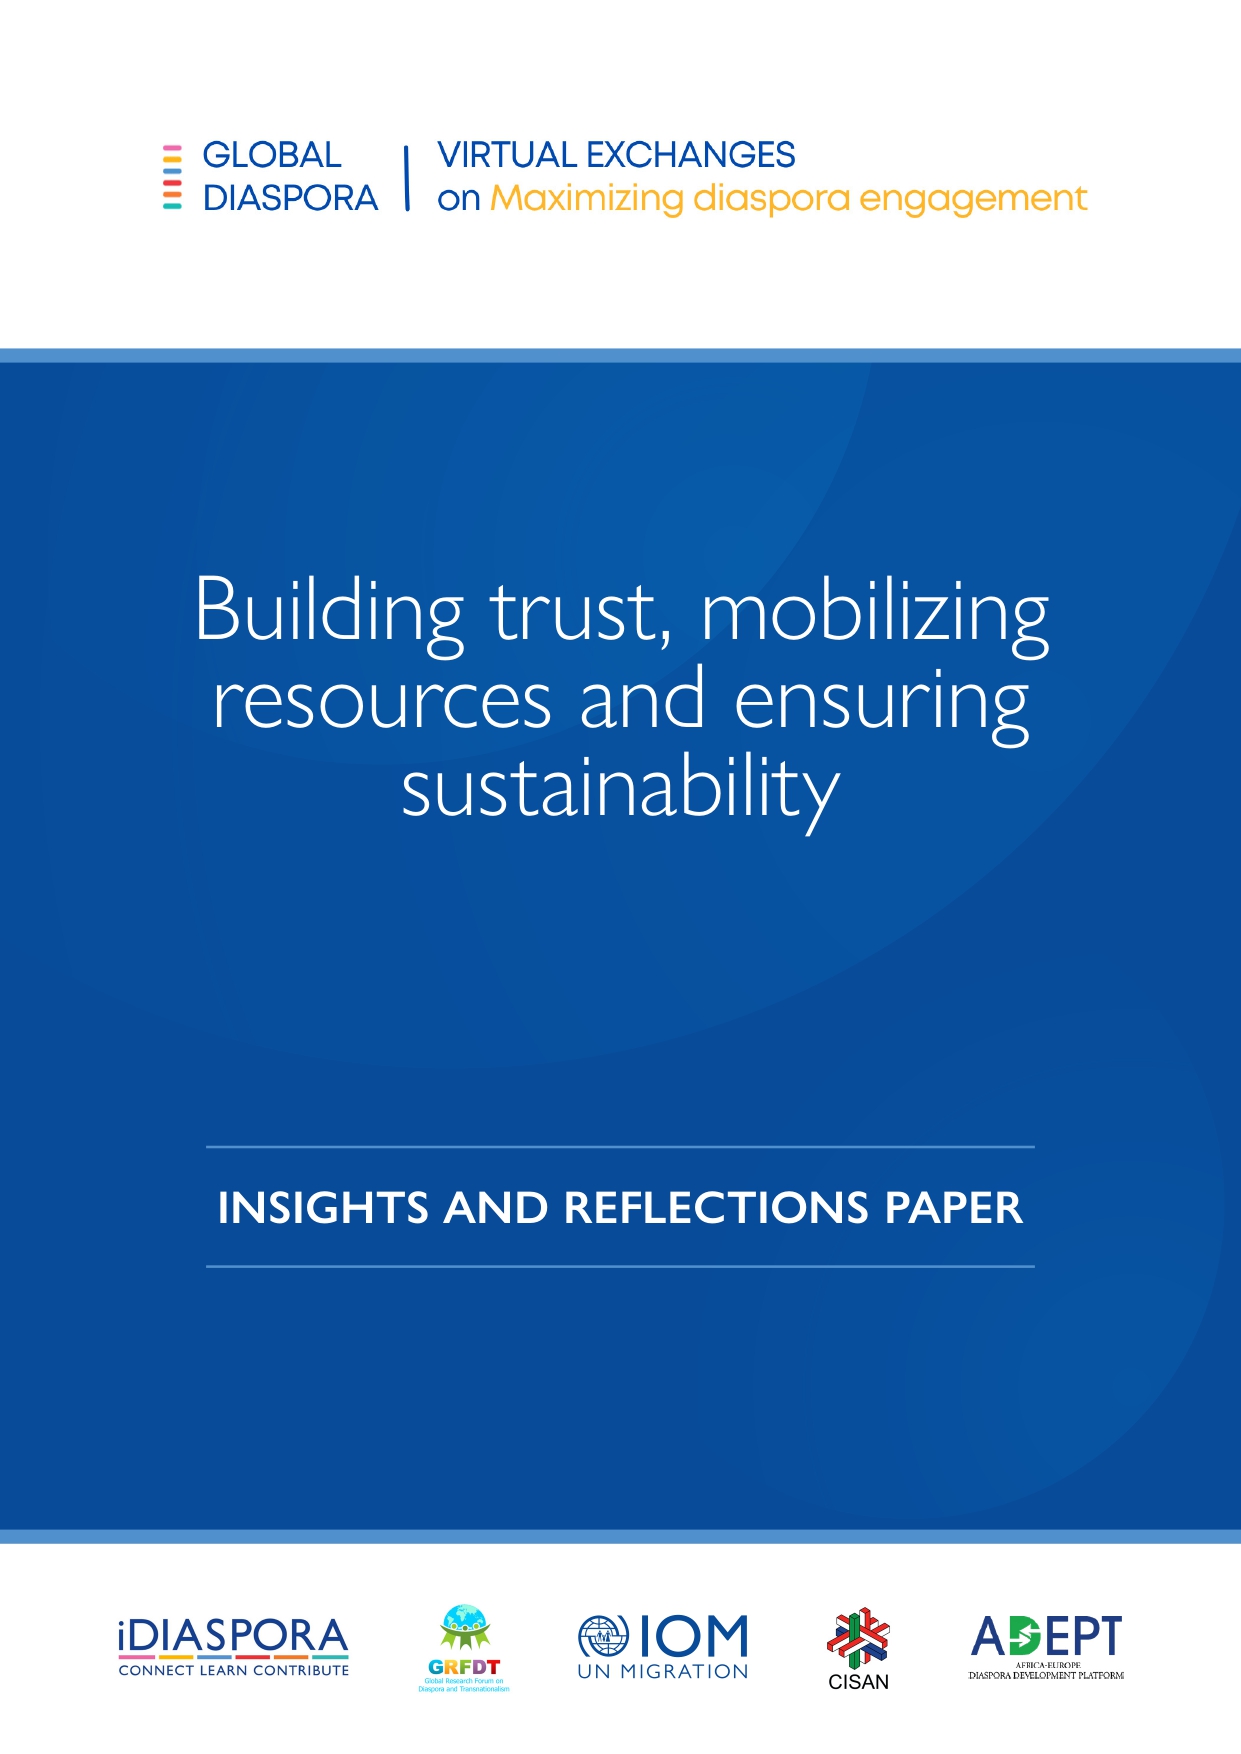 Building trust, mobilizing resources and ensuring sustainability